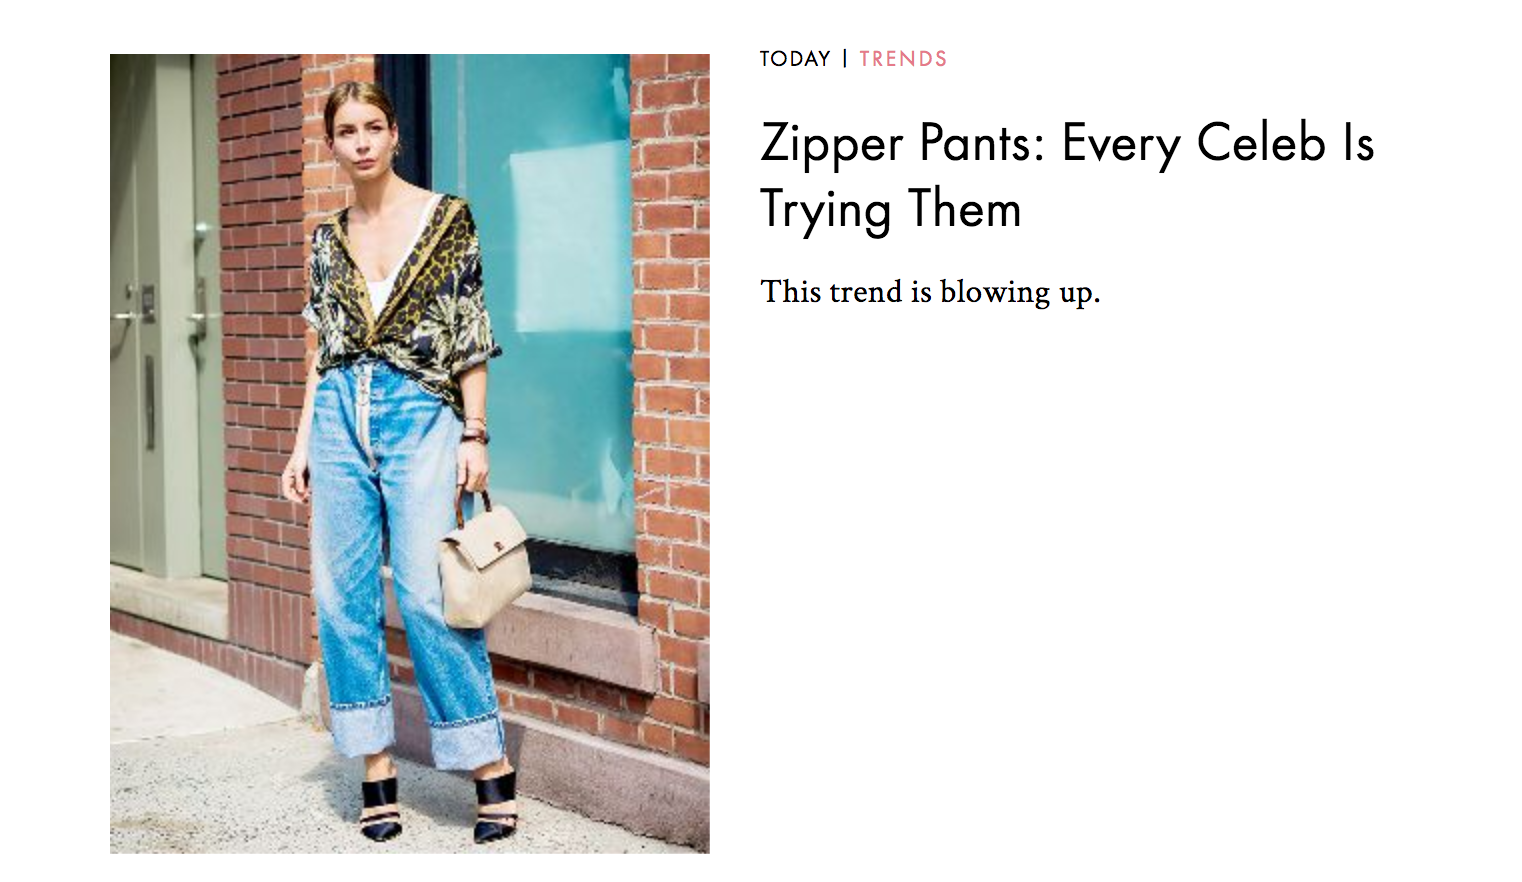 A model wearing jeans with a prominent exposed zipper and the text "Zipper Pants: Every Celeb is Trying Them"